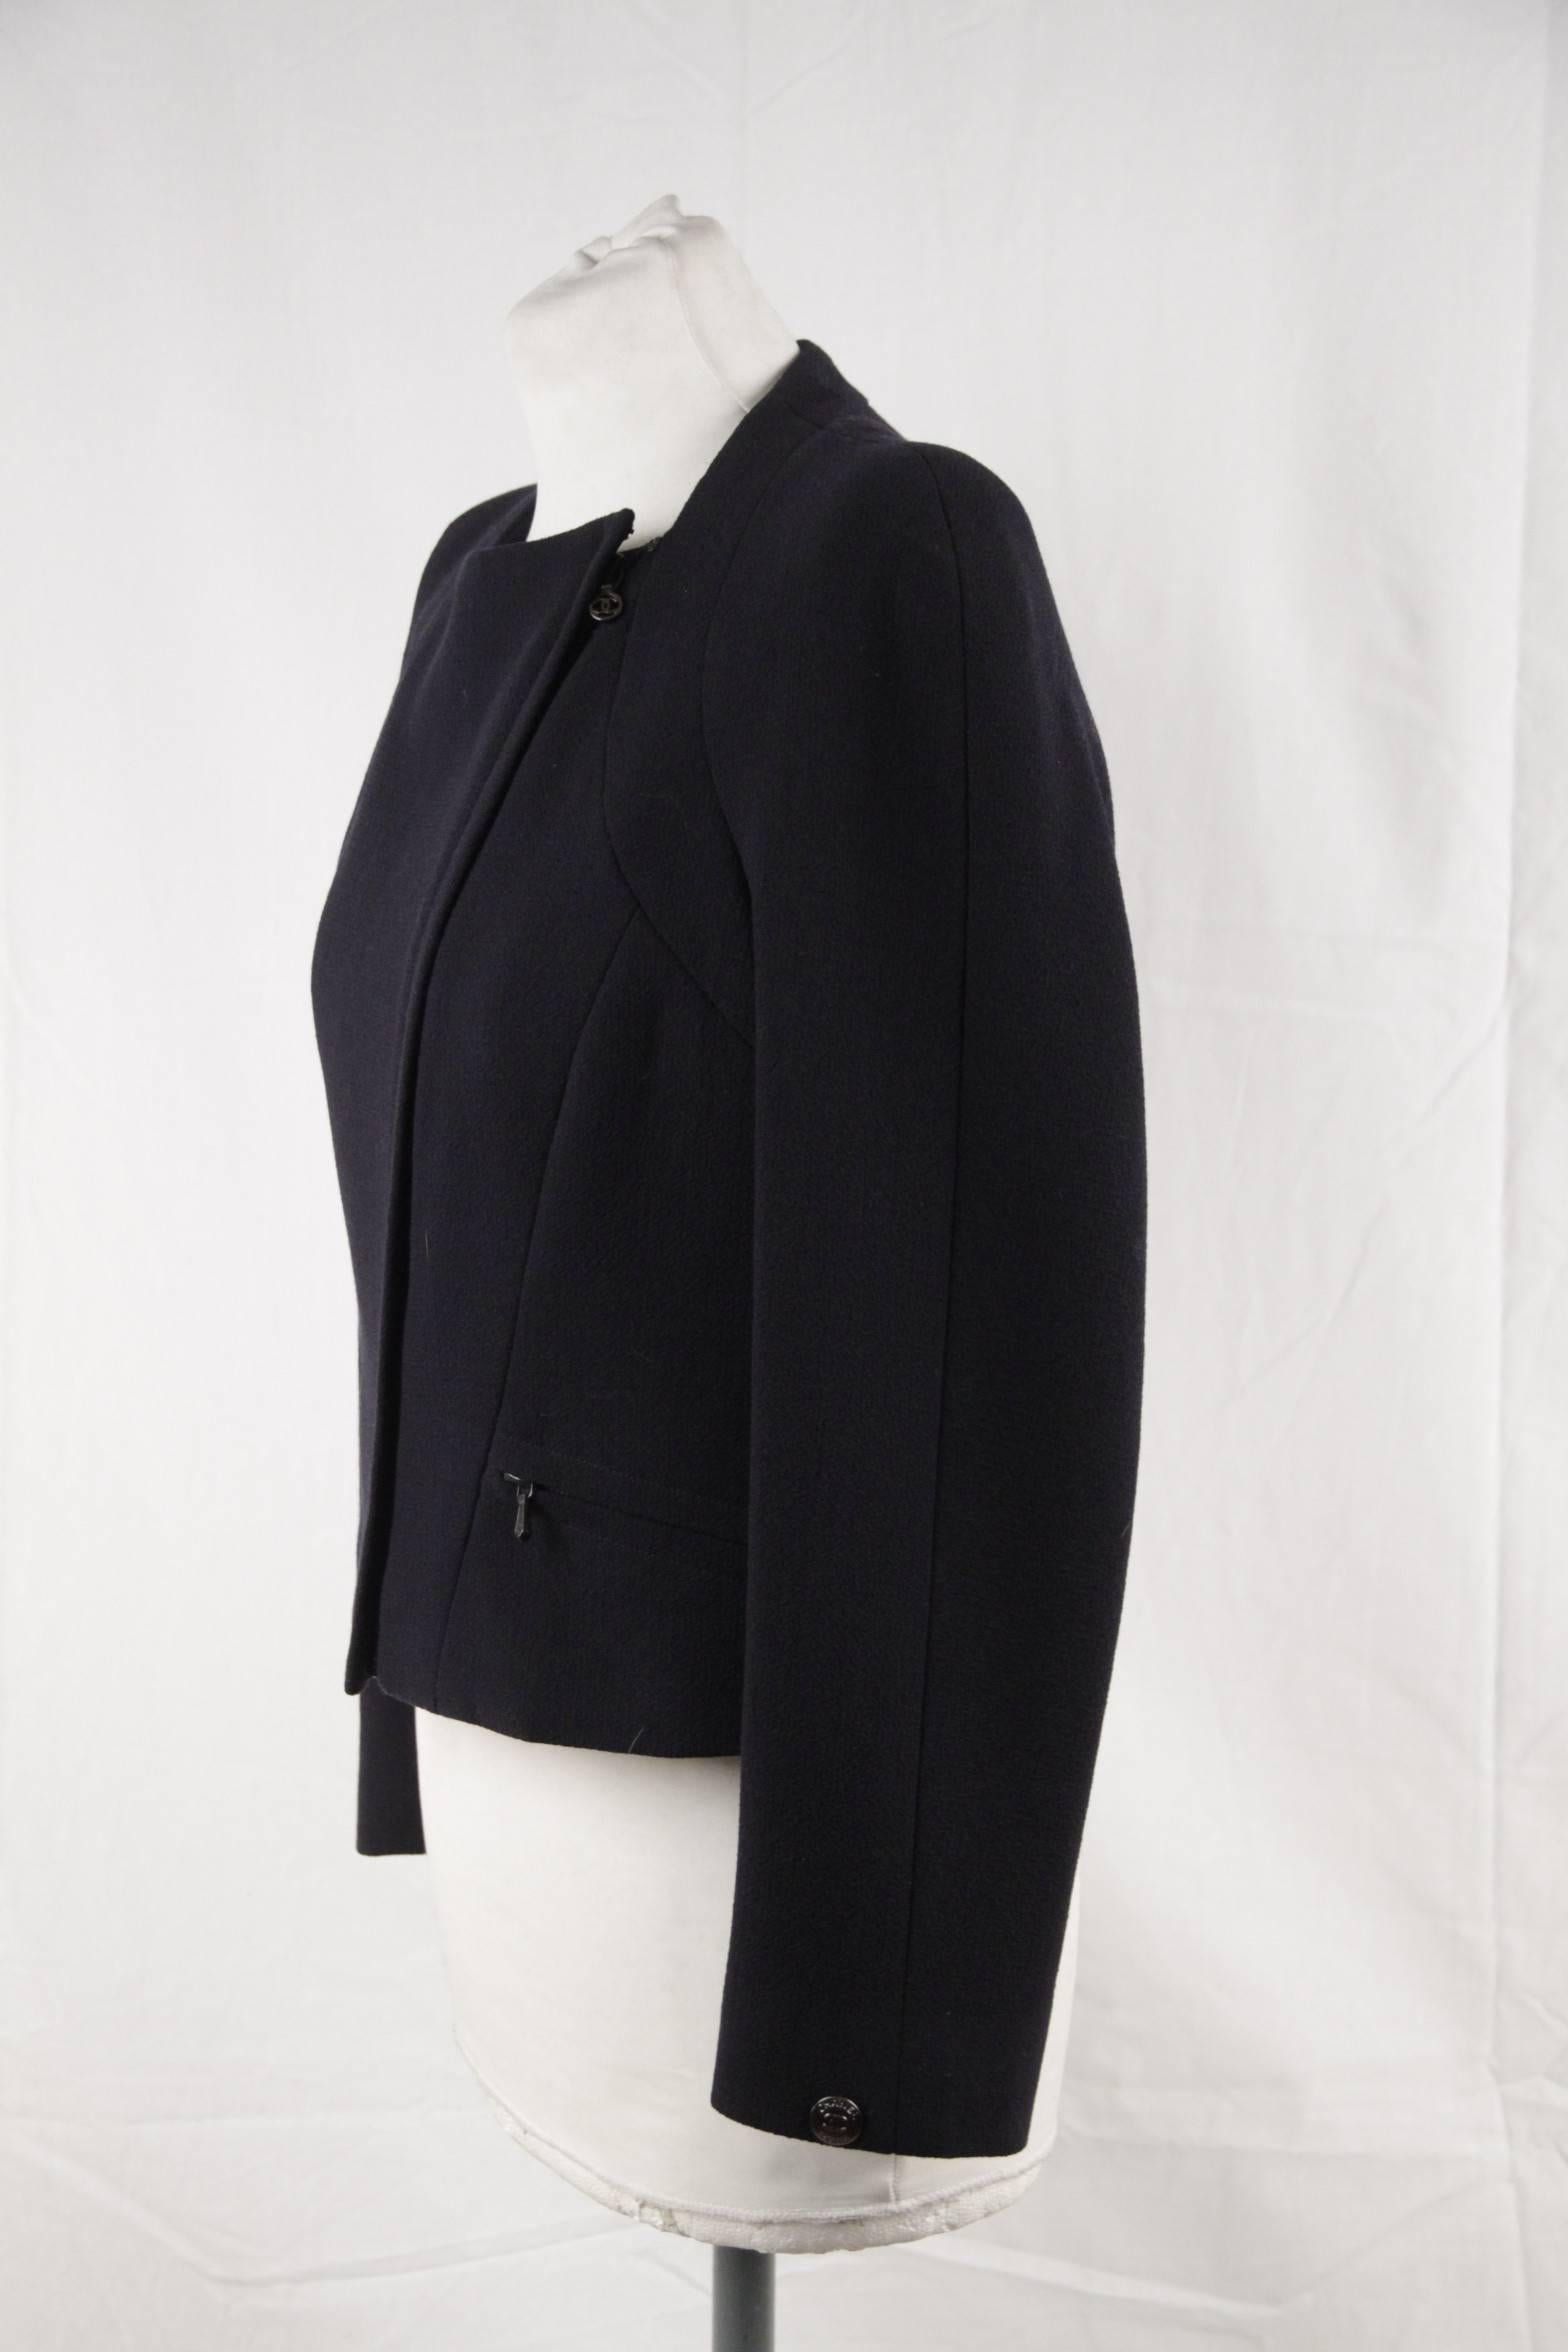 Women's CHANEL BOUTIQUE Navy Blue Wool CROPPED Zip Up JACKET Size 42